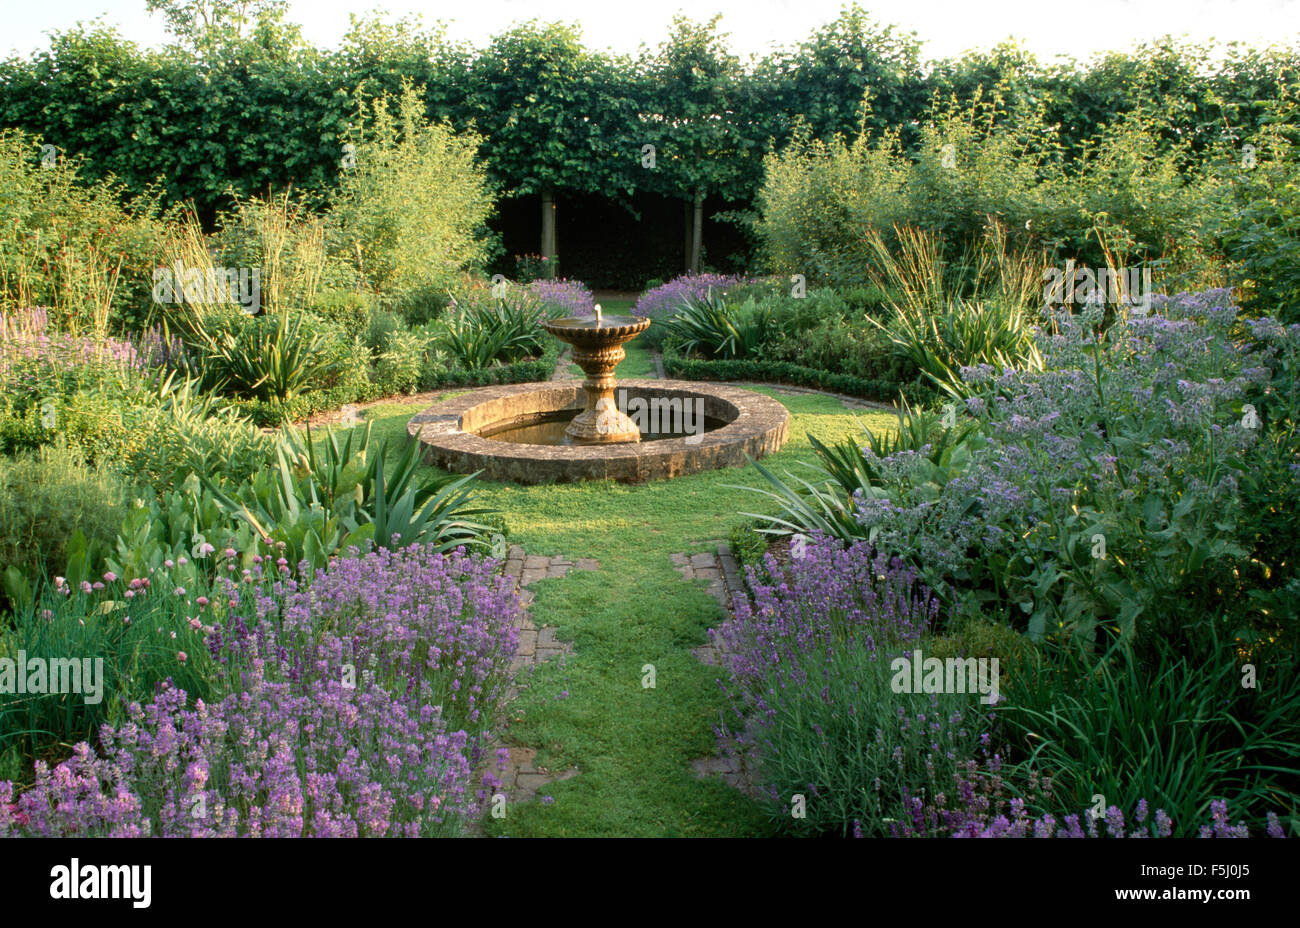 Lavender and borage in borders either side of a camomile path to a circular pool and fountain in a country garden Stock Photo